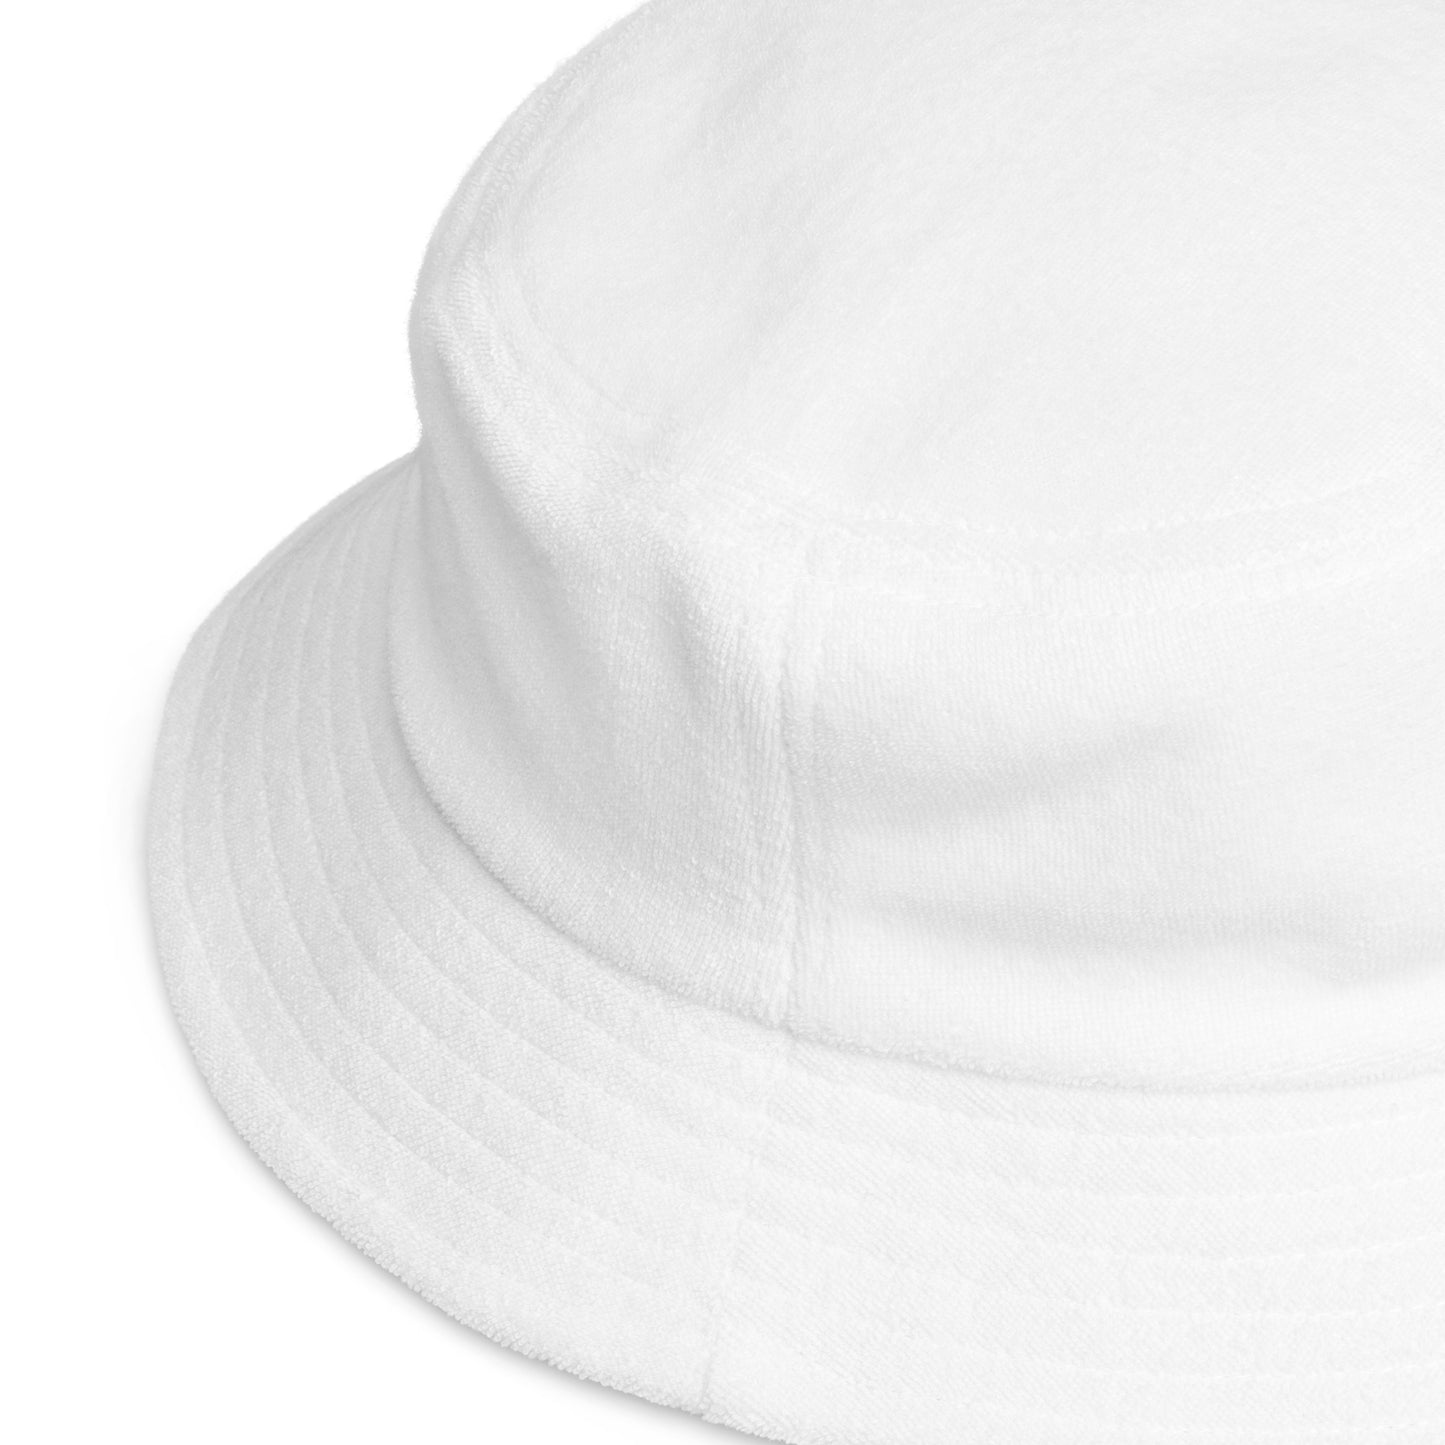 Jakes Octopus Terry Cloth Bucket Hat in Multiple Colors